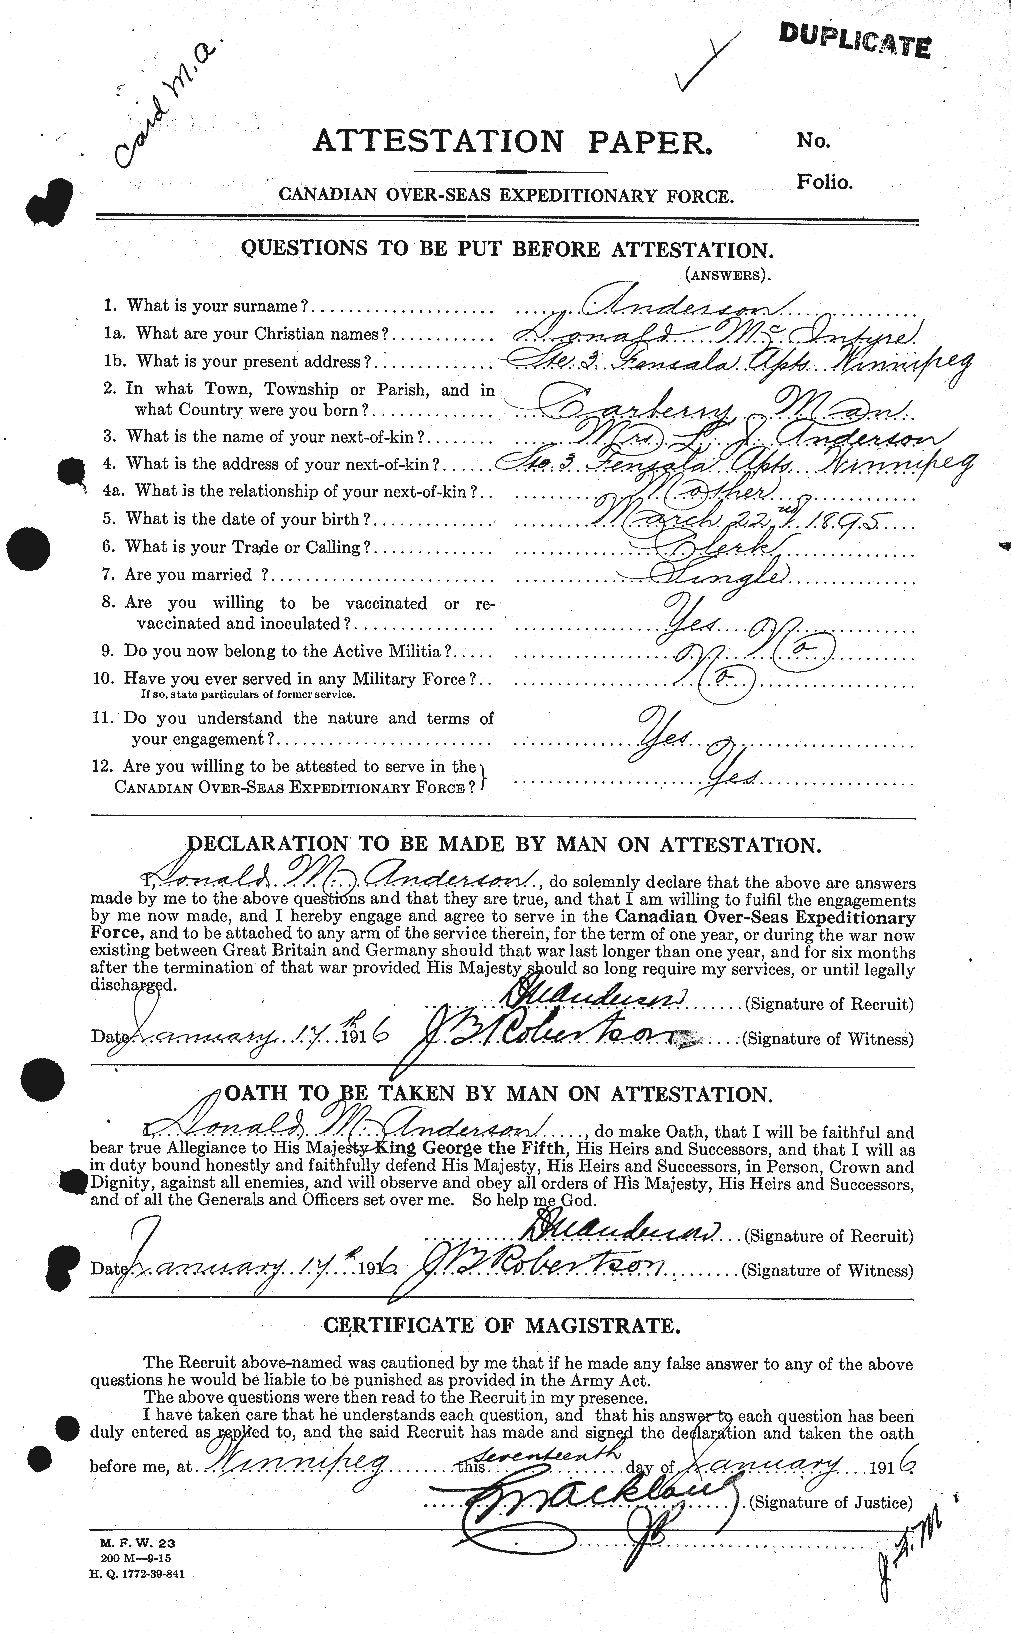 Personnel Records of the First World War - CEF 209982a